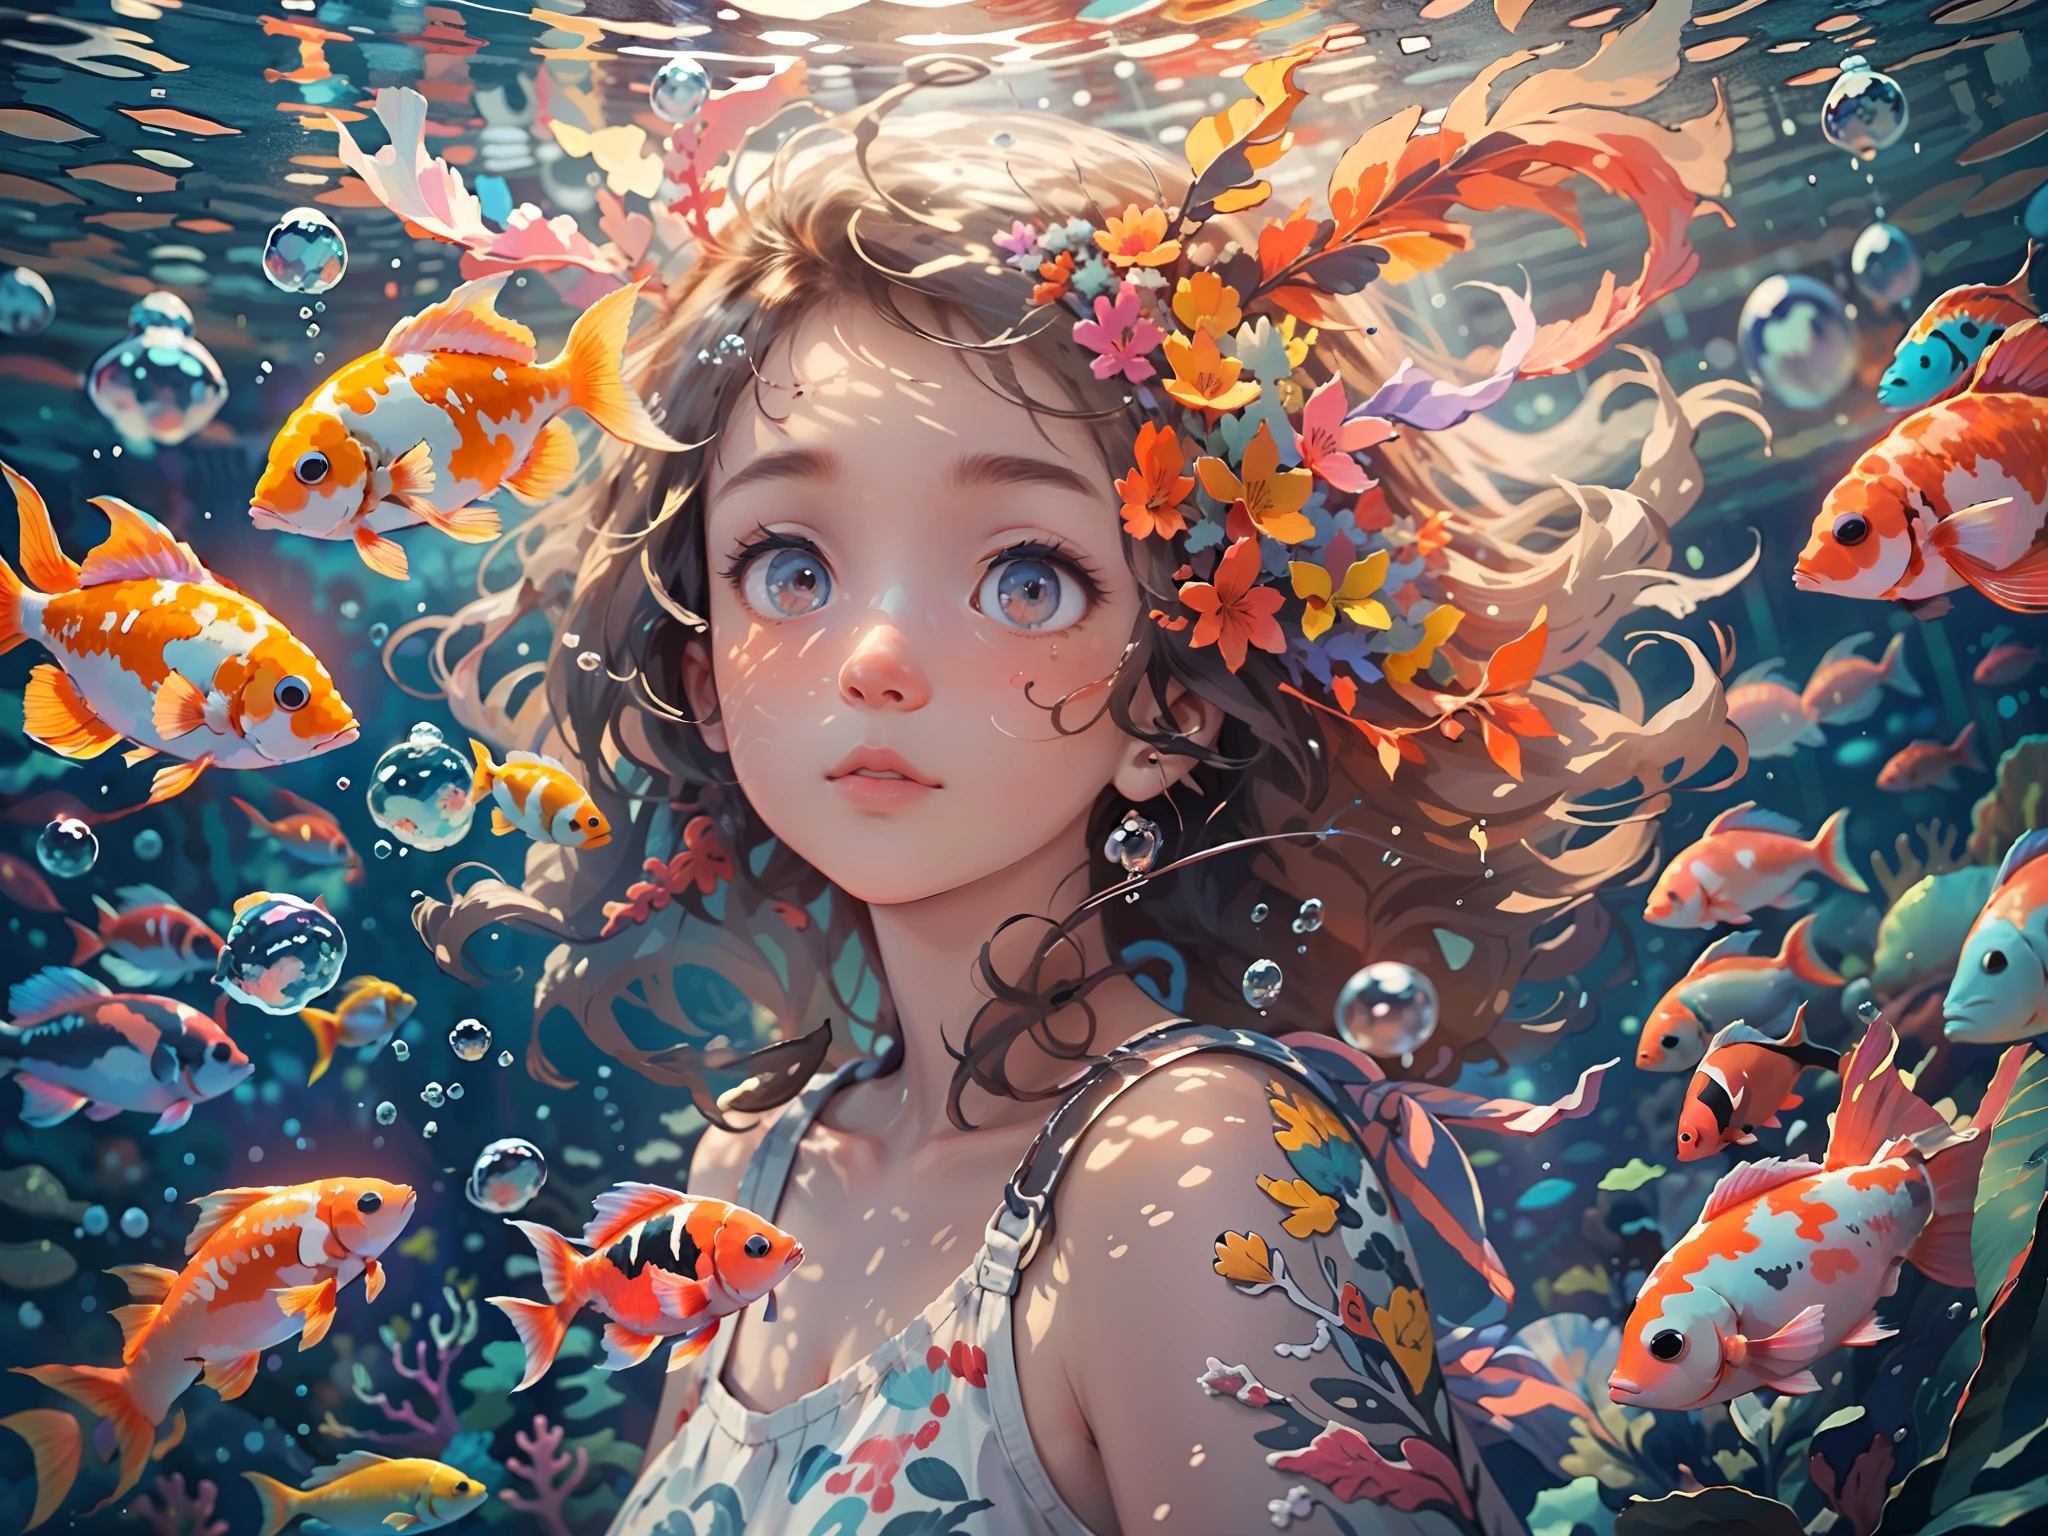 ocean floor，Marine life，Beautiful coral reef，1girll，The upper part of the body， Floating hair，Eyes with a story，looks into camera，Hair flows in water，Close-up of the shot，Koi is surrounded by koi， Buble，airbubble， Under the water， The sun refracts light， jelly fish，Messy painting style，8K, Super meticulous, Best quality, Masterpiece,